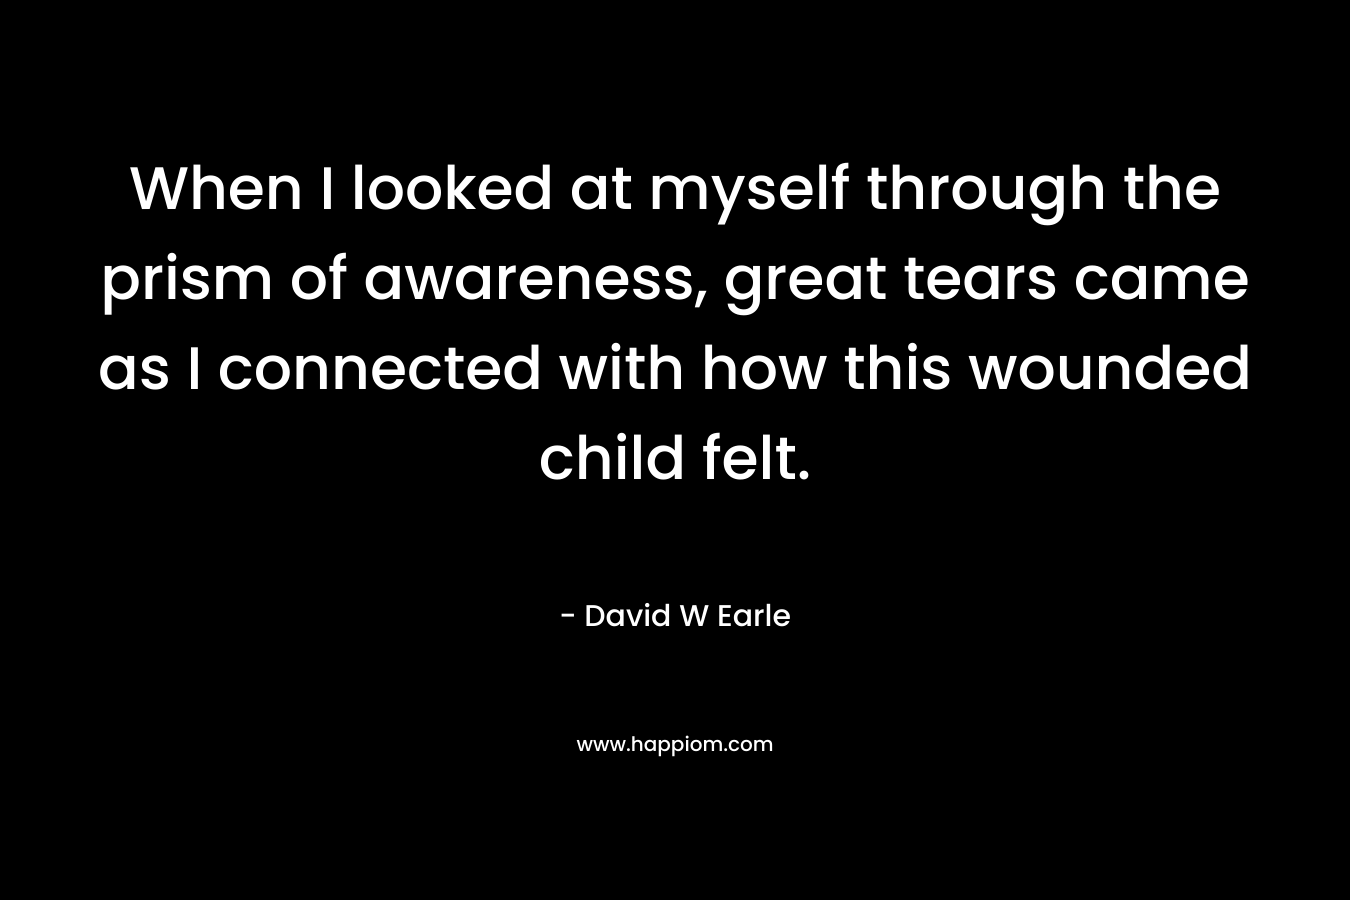 When I looked at myself through the prism of awareness, great tears came as I connected with how this wounded child felt.